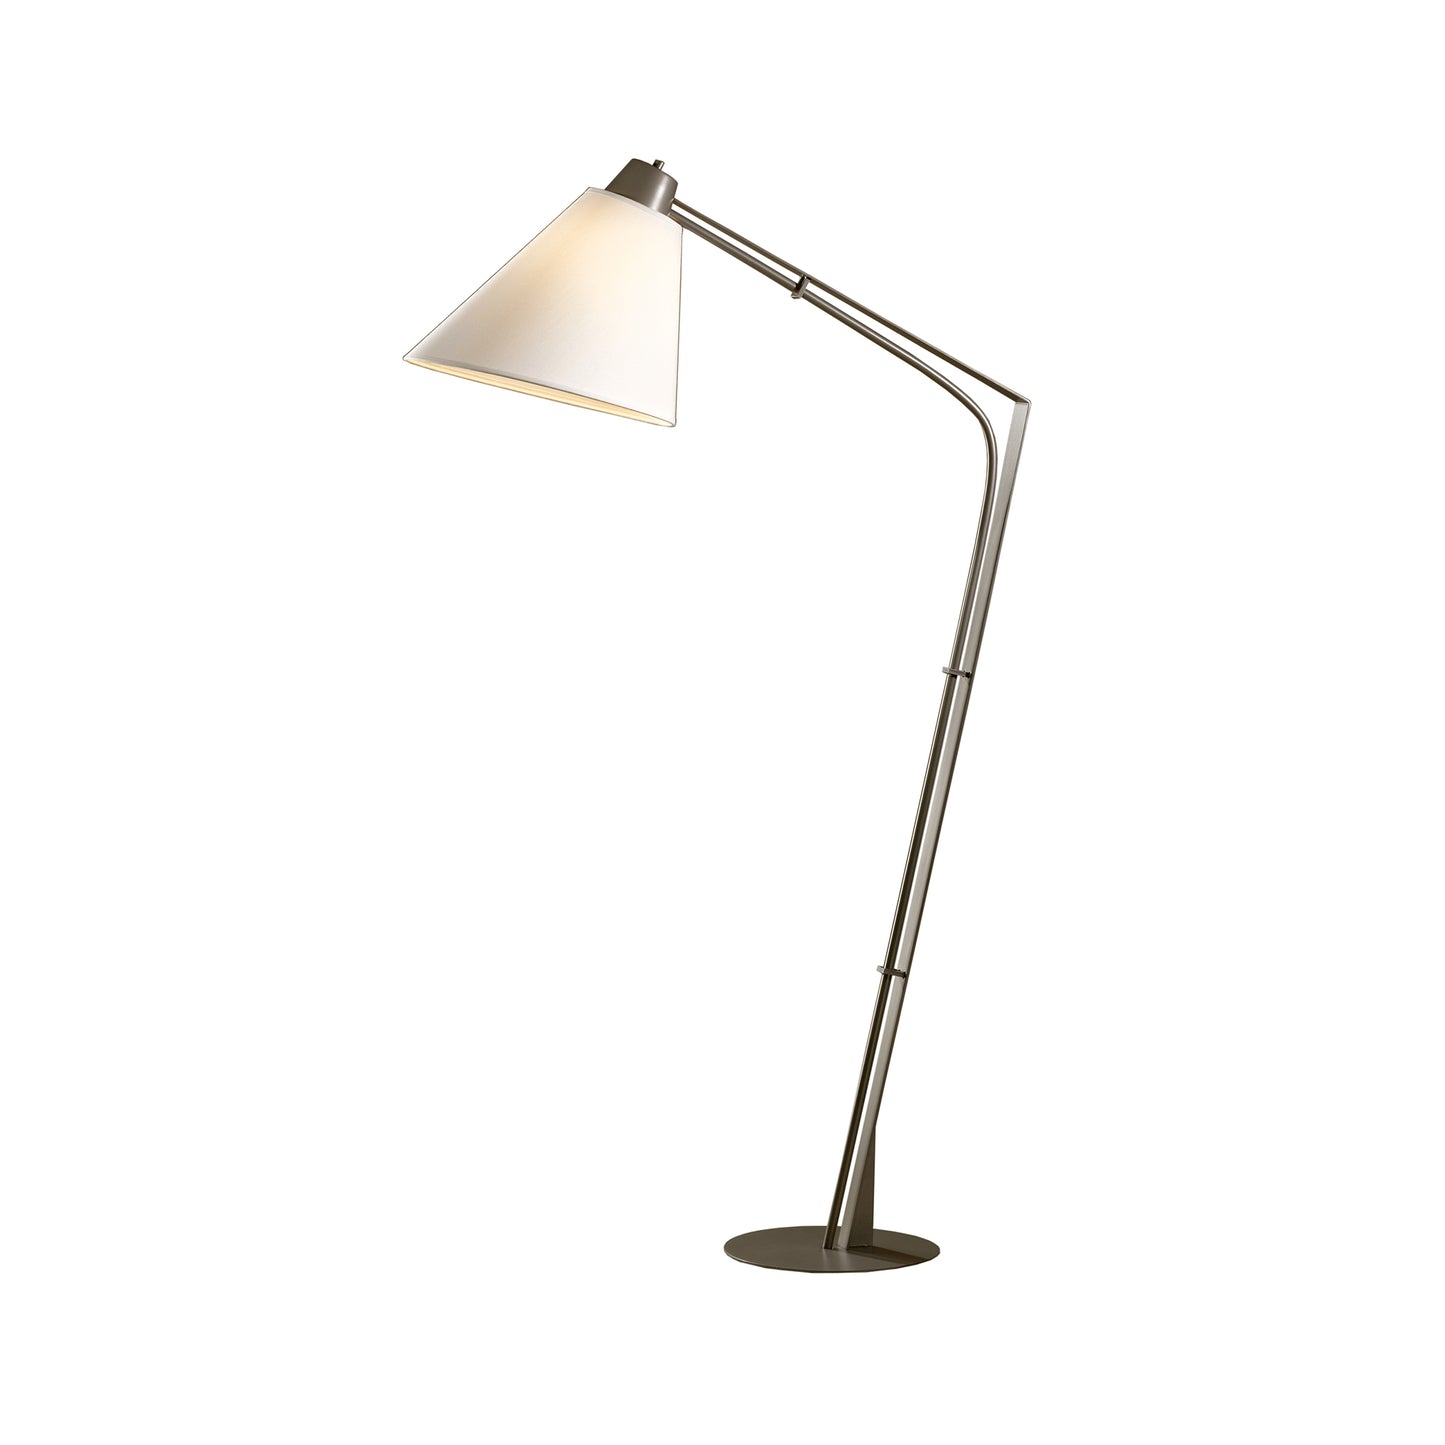 A modern Hubbardton Forge Reach Floor Lamp with a curved metal stand and a cone-shaped light shade, isolated on a white background.